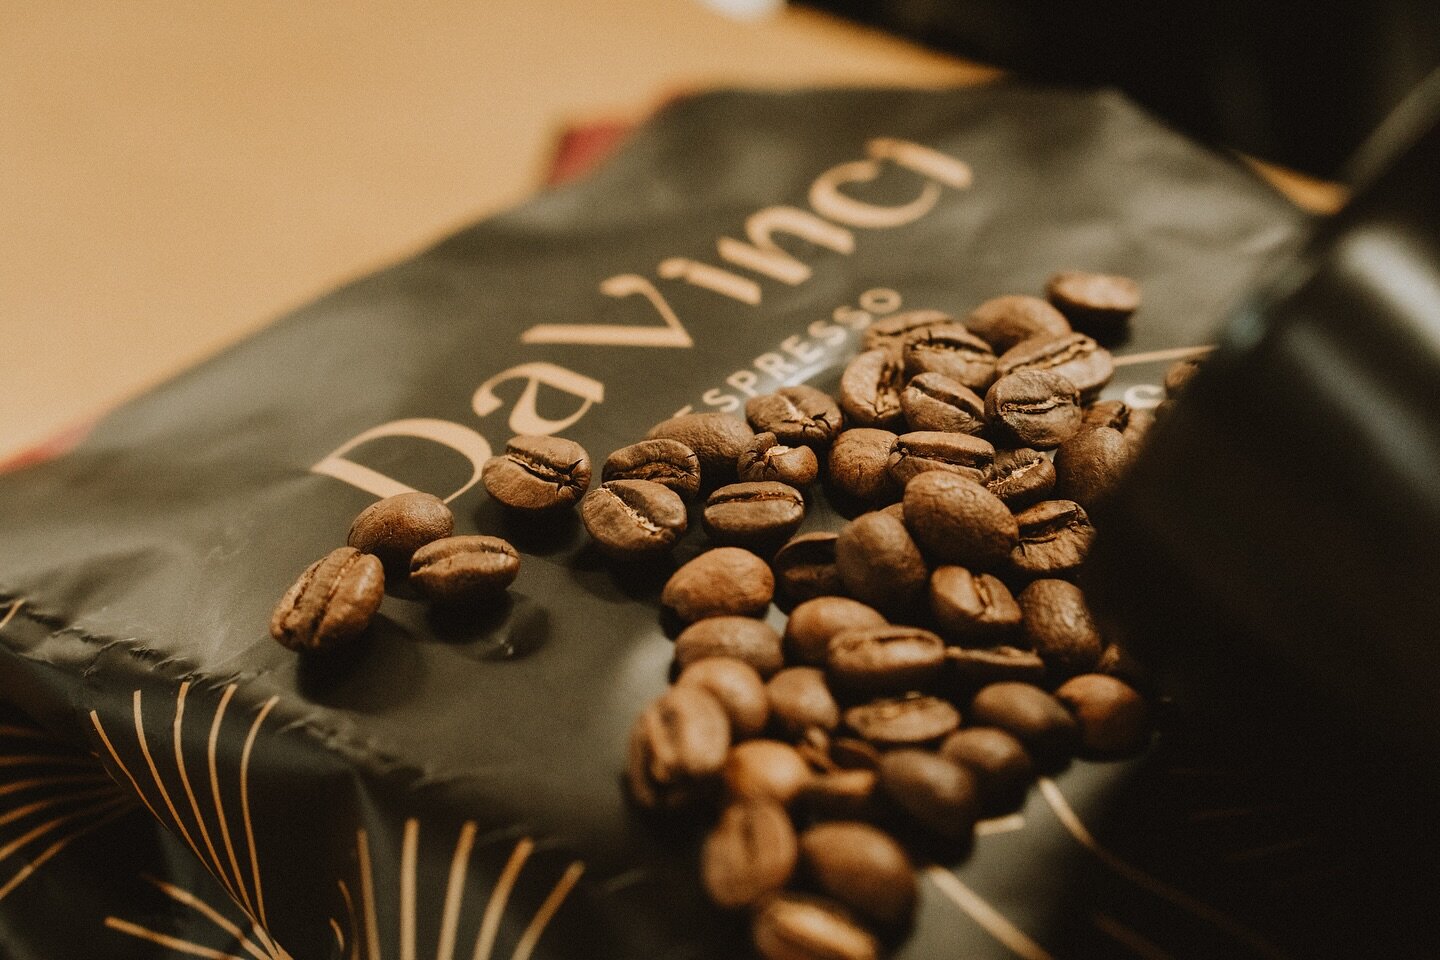 𝐋𝐞𝐨𝐧𝐚𝐫𝐝𝐨☕️

Experience the unparalleled taste of our exquisite Leonardo blend, crafted with utmost care using only the finest 100% Arabica beans. Indulge in its medium body and acidity, accompanied by a tantalising fruity flavour and delicate